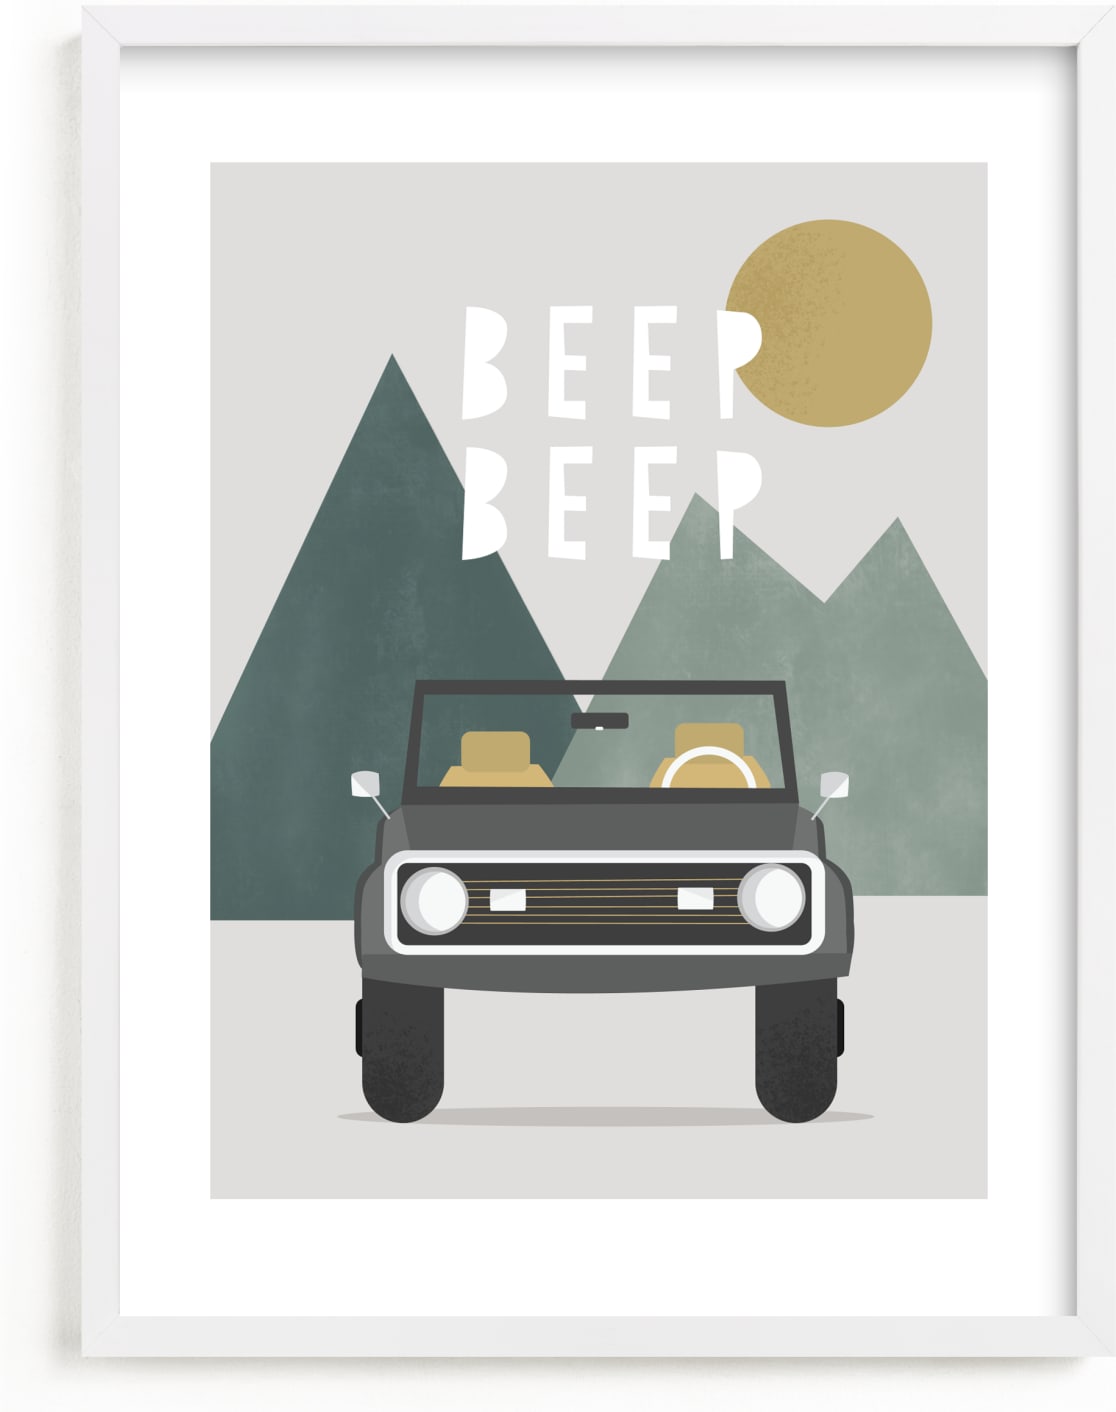 This is a yellow, grey, green art by Christie Garcia called Beep Beep.